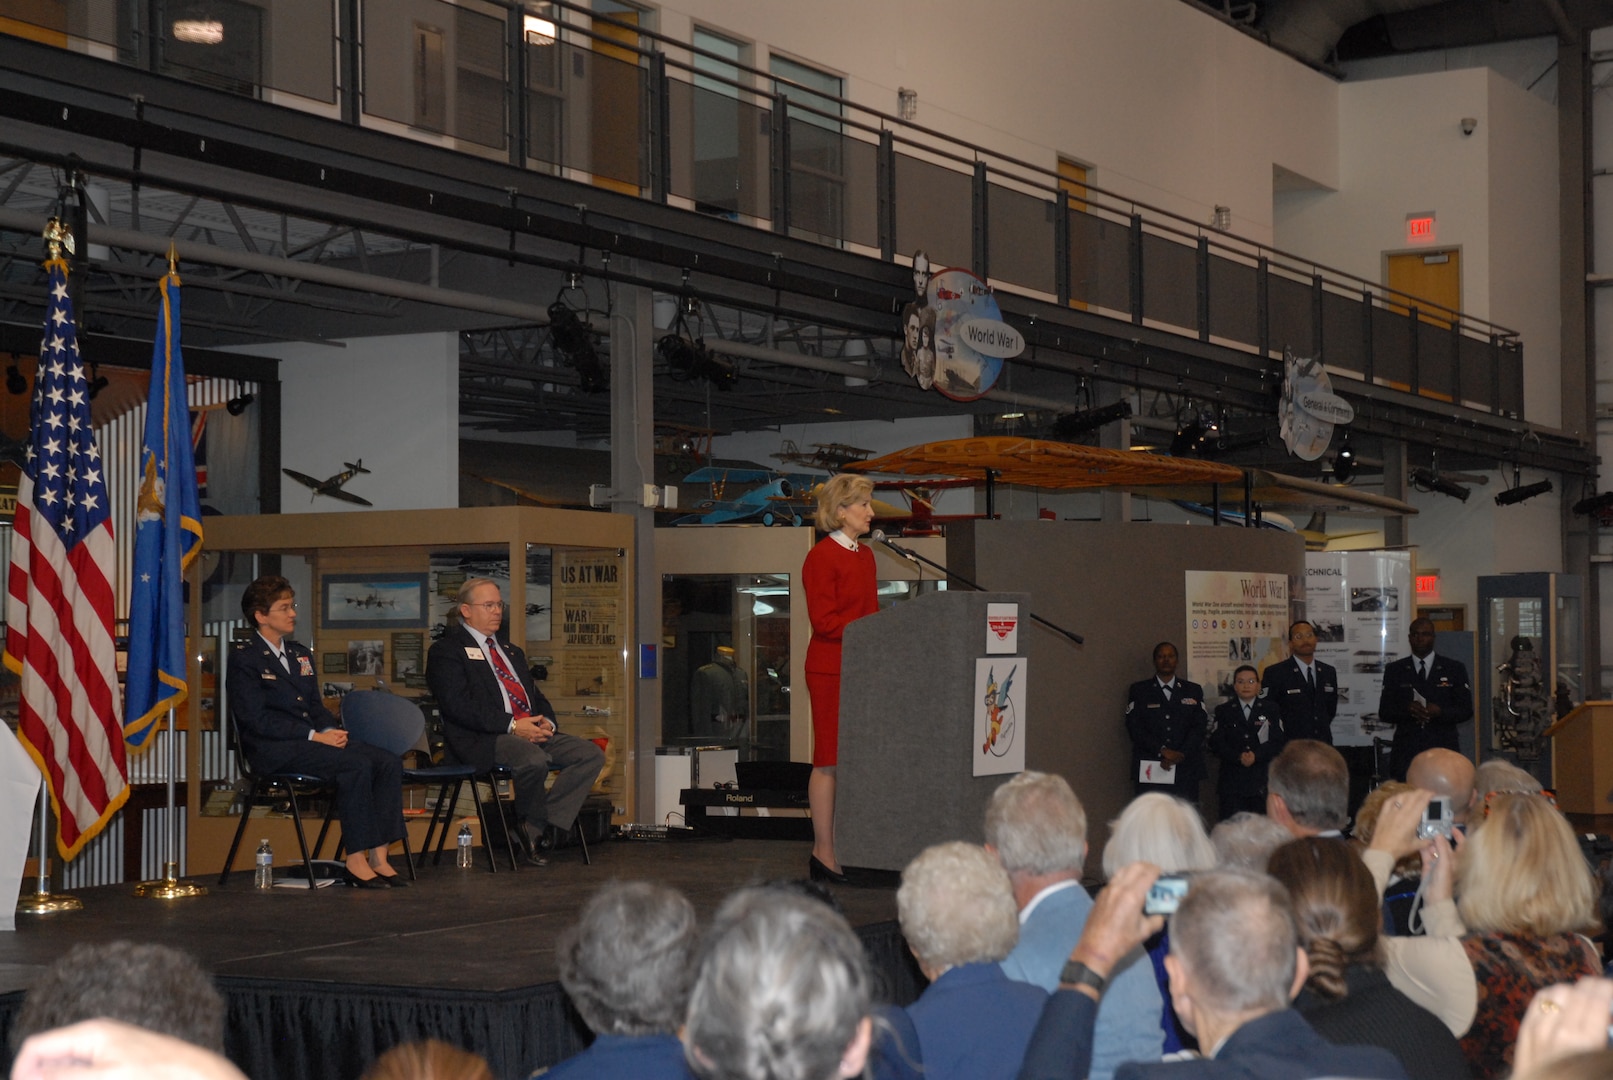 Senator Kay Bailey Hutchison R-Texas addresses an attentive crowd during an award presentation for the Texas Women Airforce Service Pilots of World War II at Love Field in Dallas, Texas Nov. 11. (Photo by Senior Airman Katie Hickerson)